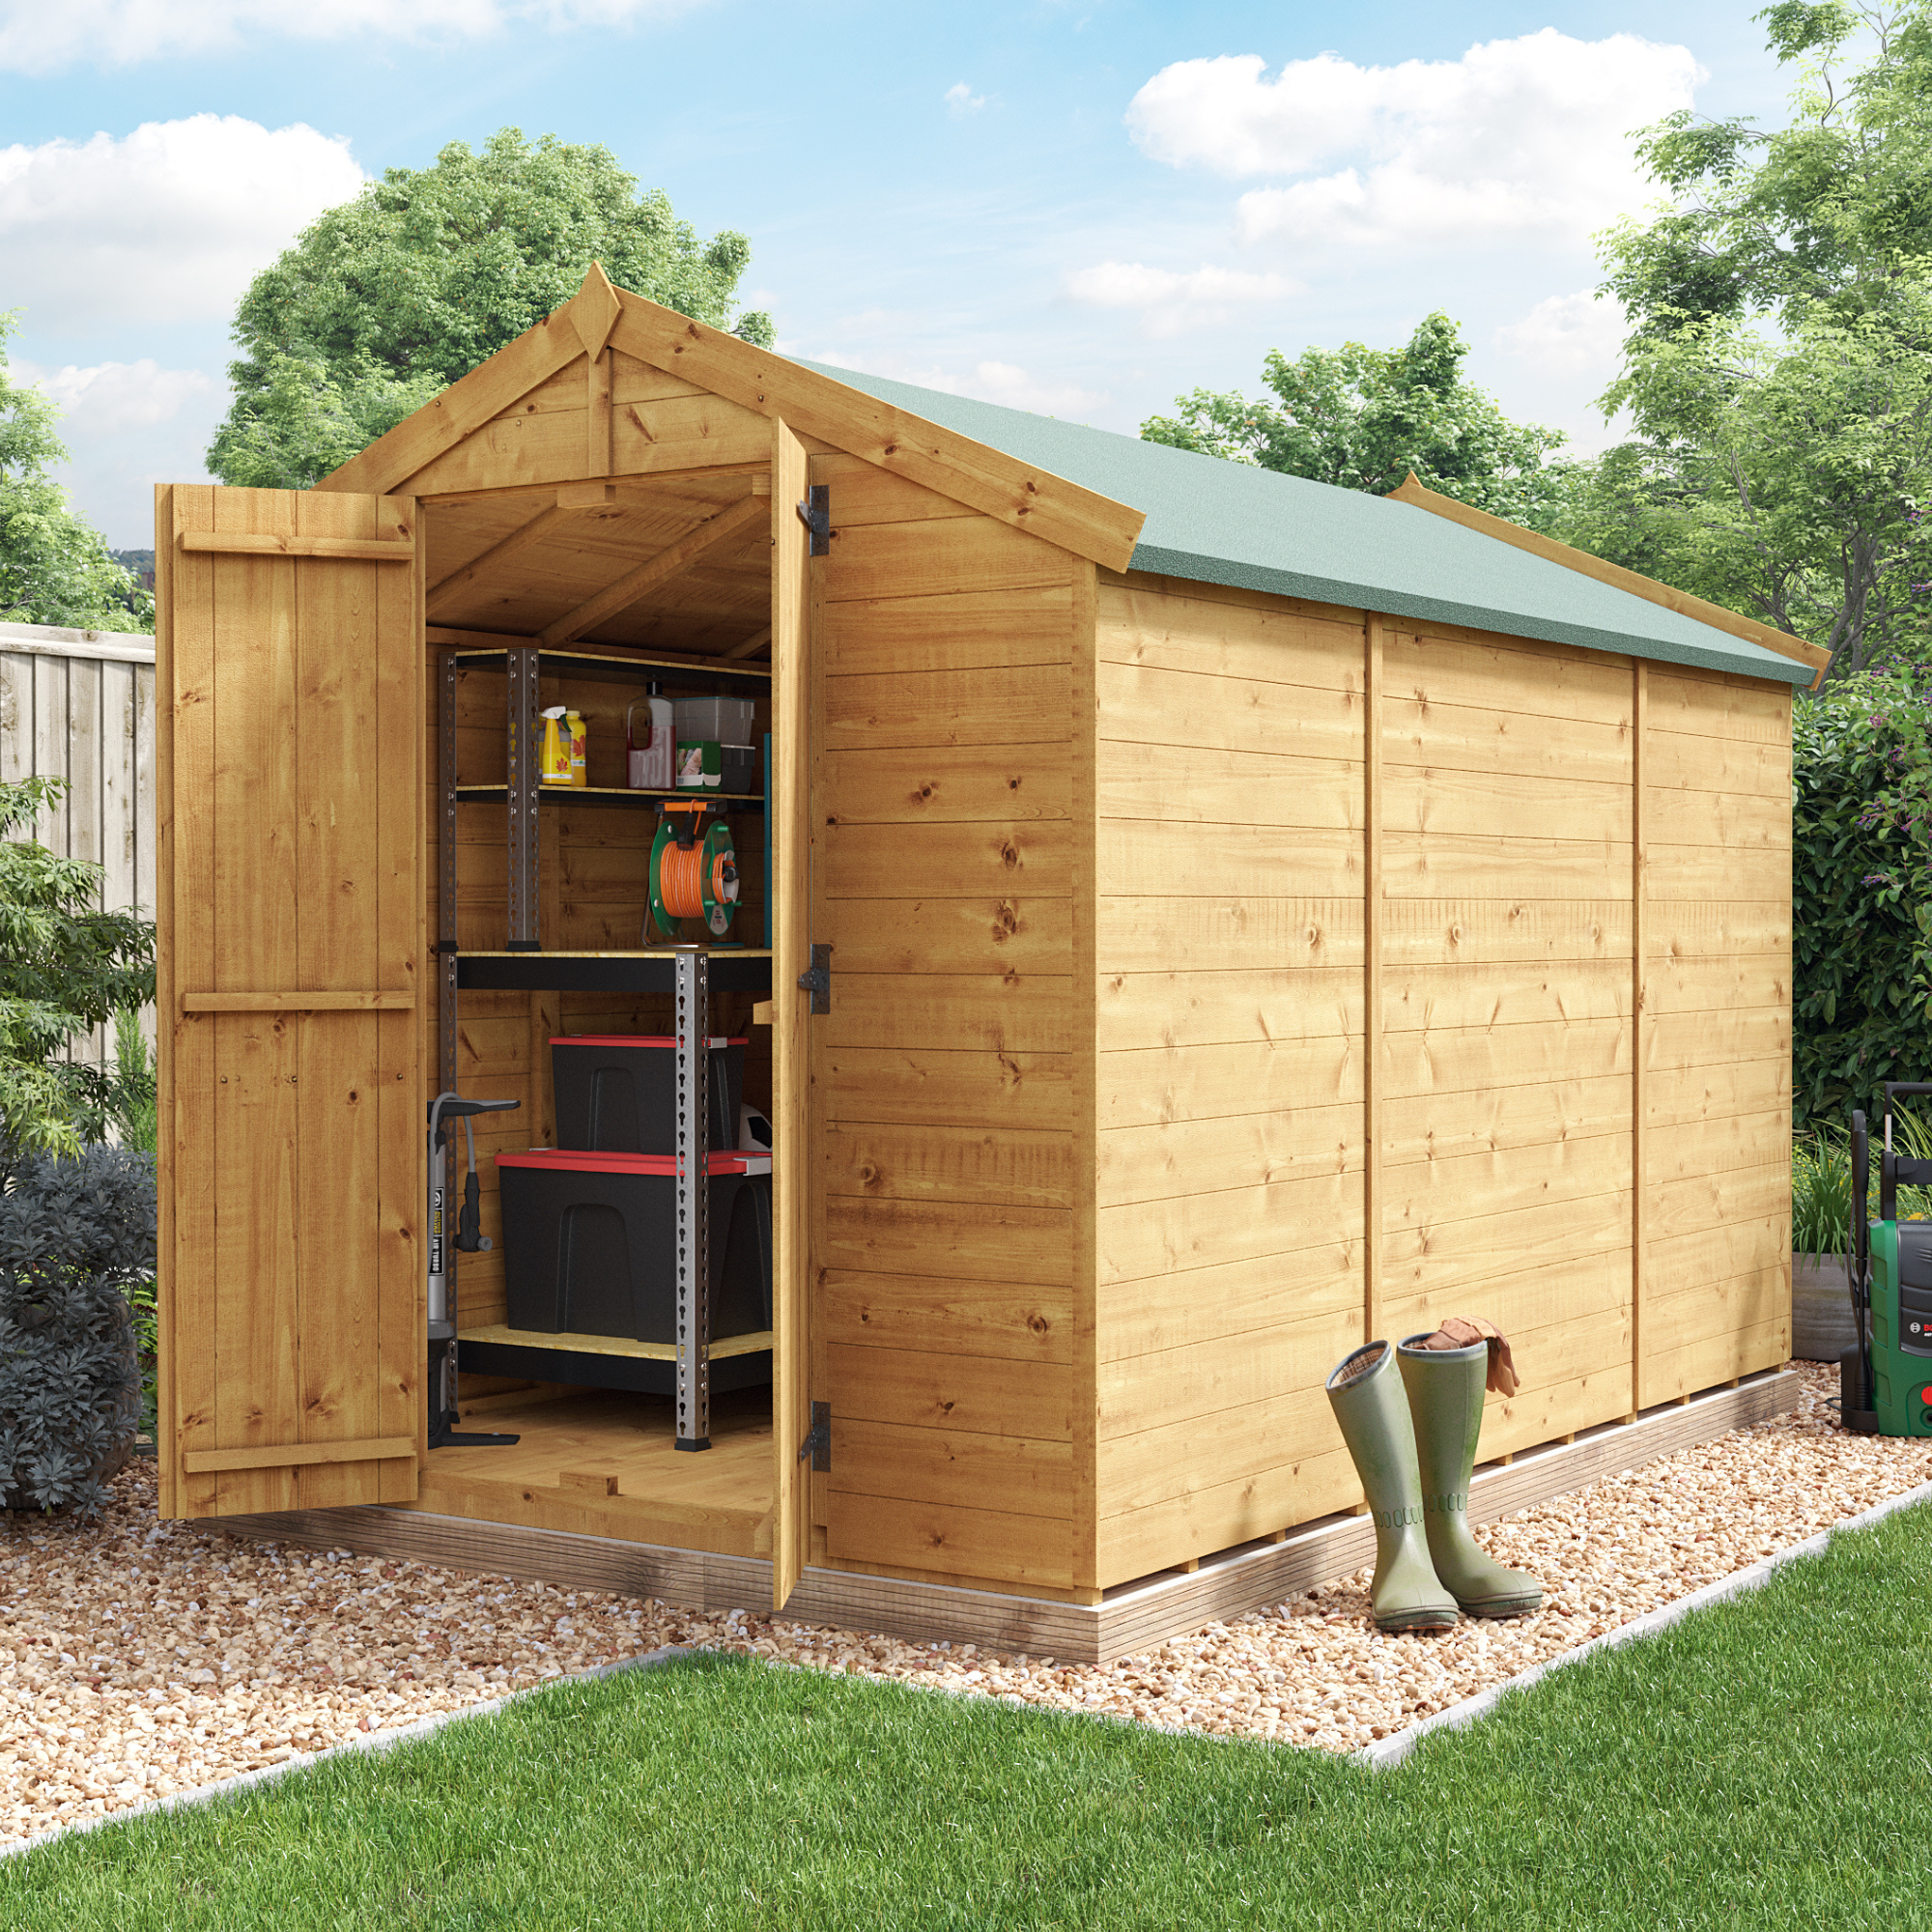 Image of 10 x 6 Shed - BillyOh Keeper Overlap Apex Wooden Shed - Windowless 10x6 Garden Shed